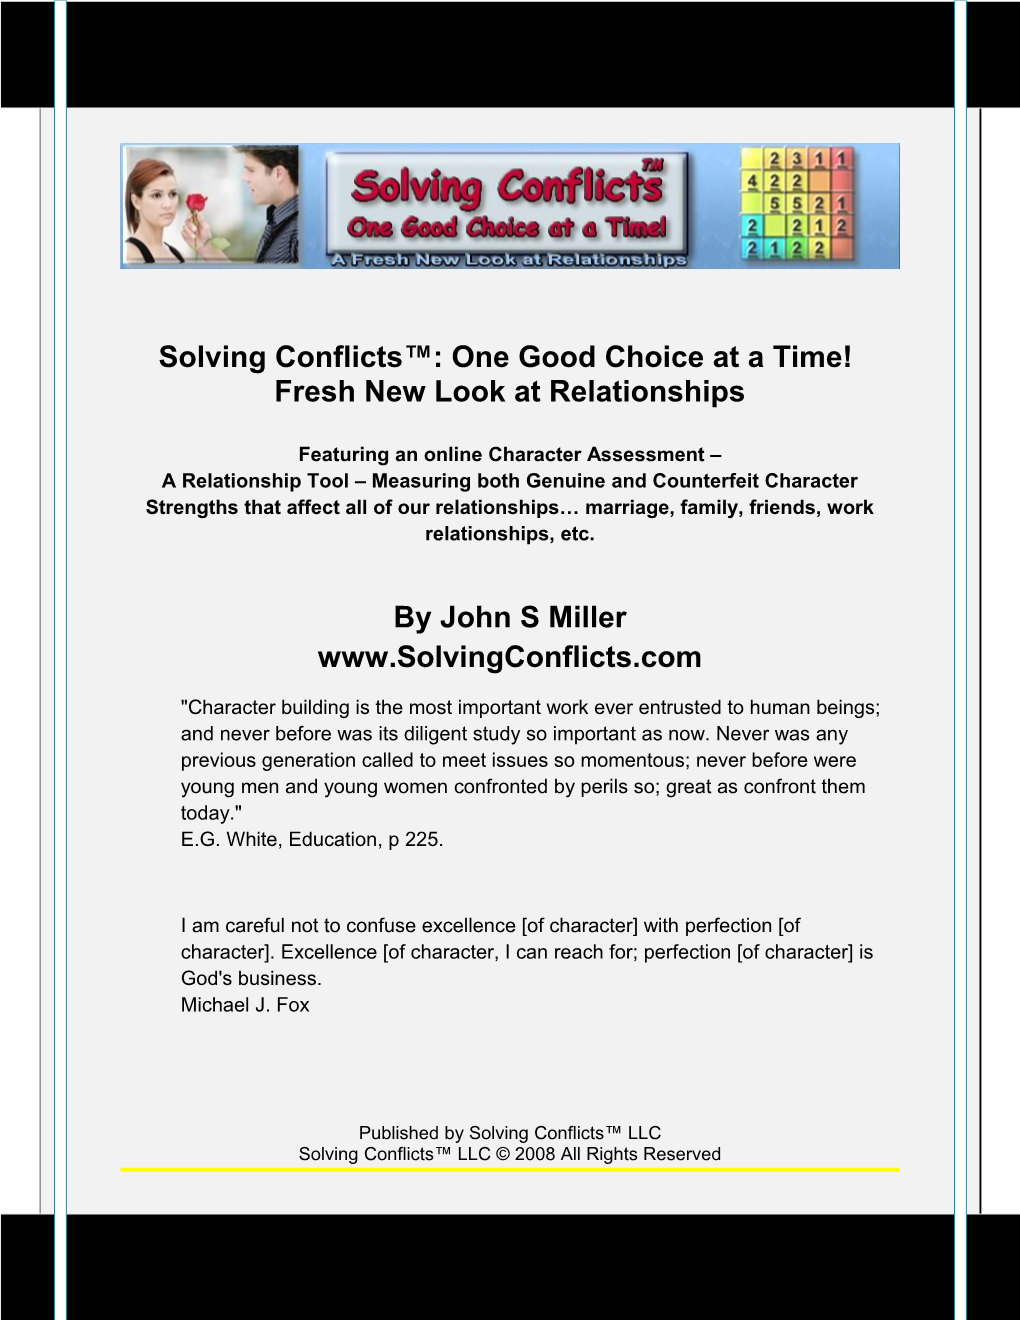 Solving Conflicts : One Good Choice at a Time!